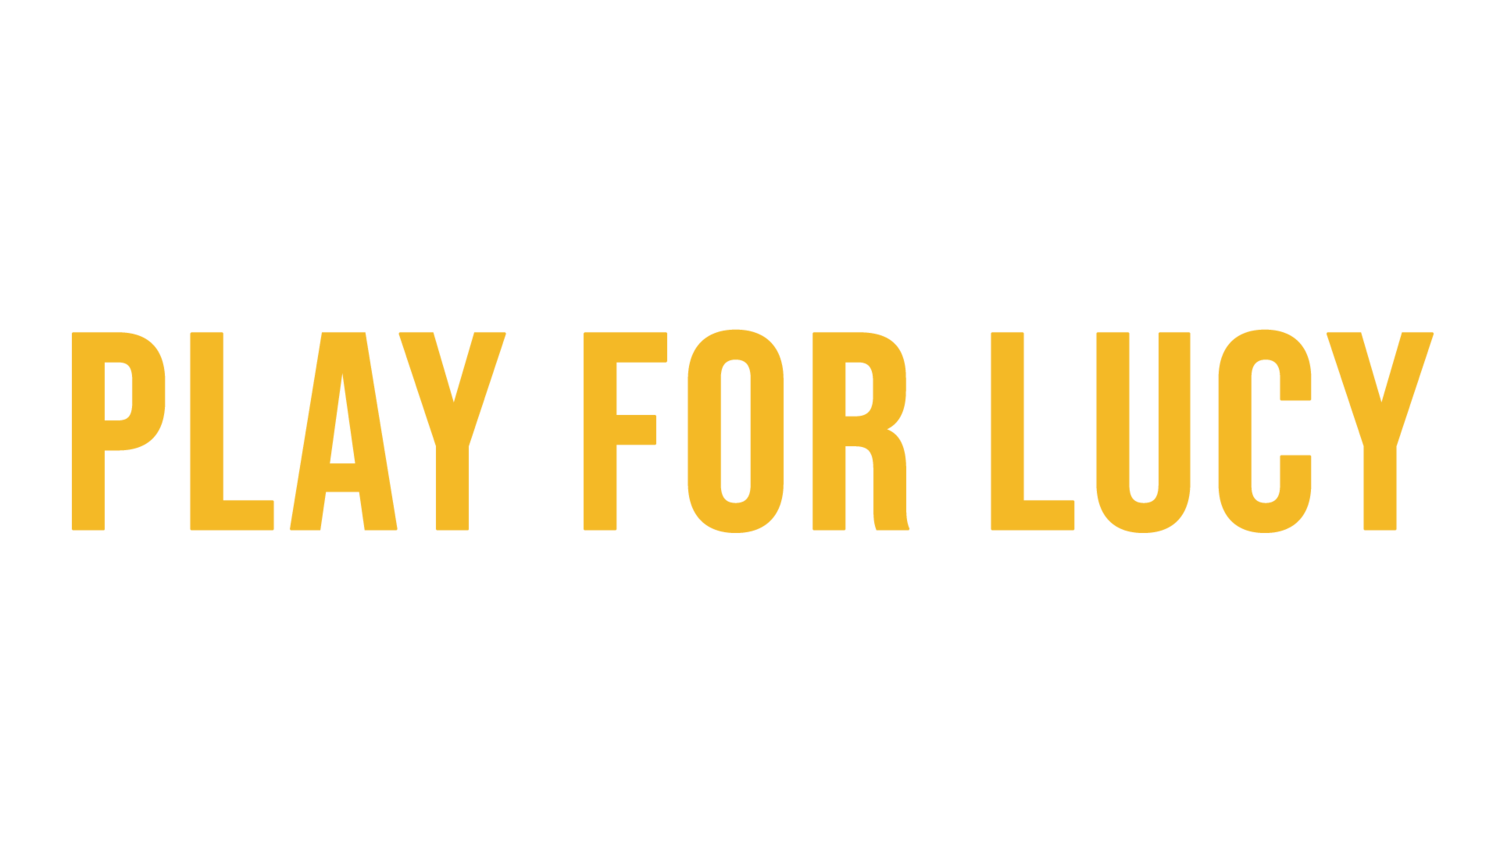 Play For Lucy